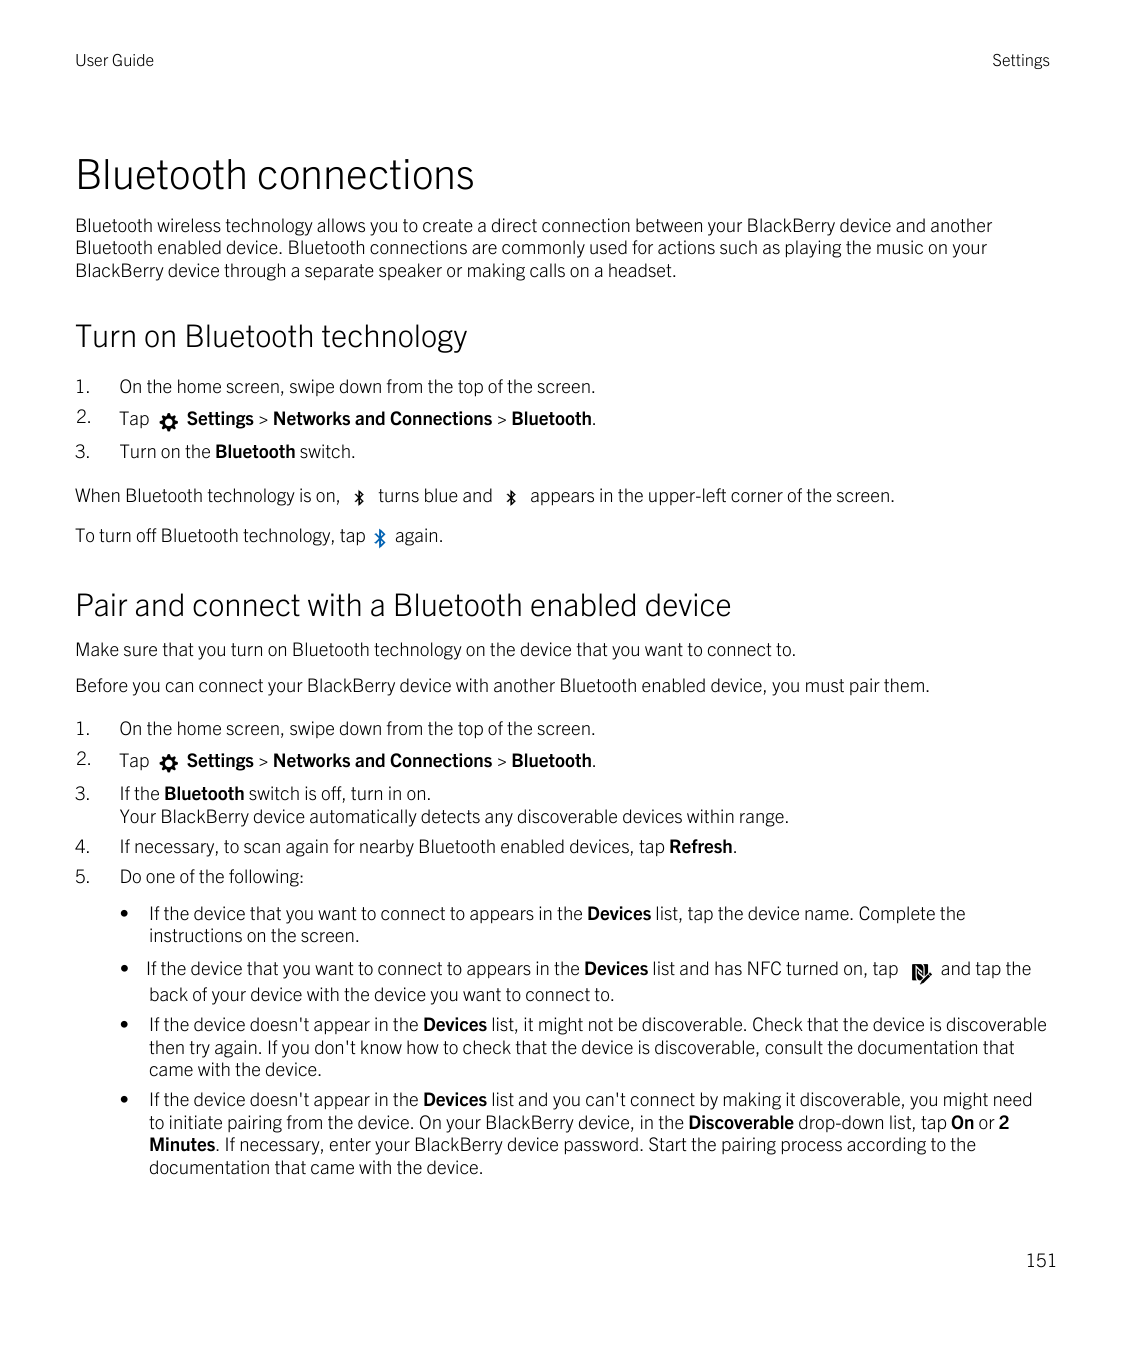 User GuideSettingsBluetooth connectionsBluetooth wireless technology allows you to create a direct connection between your Black